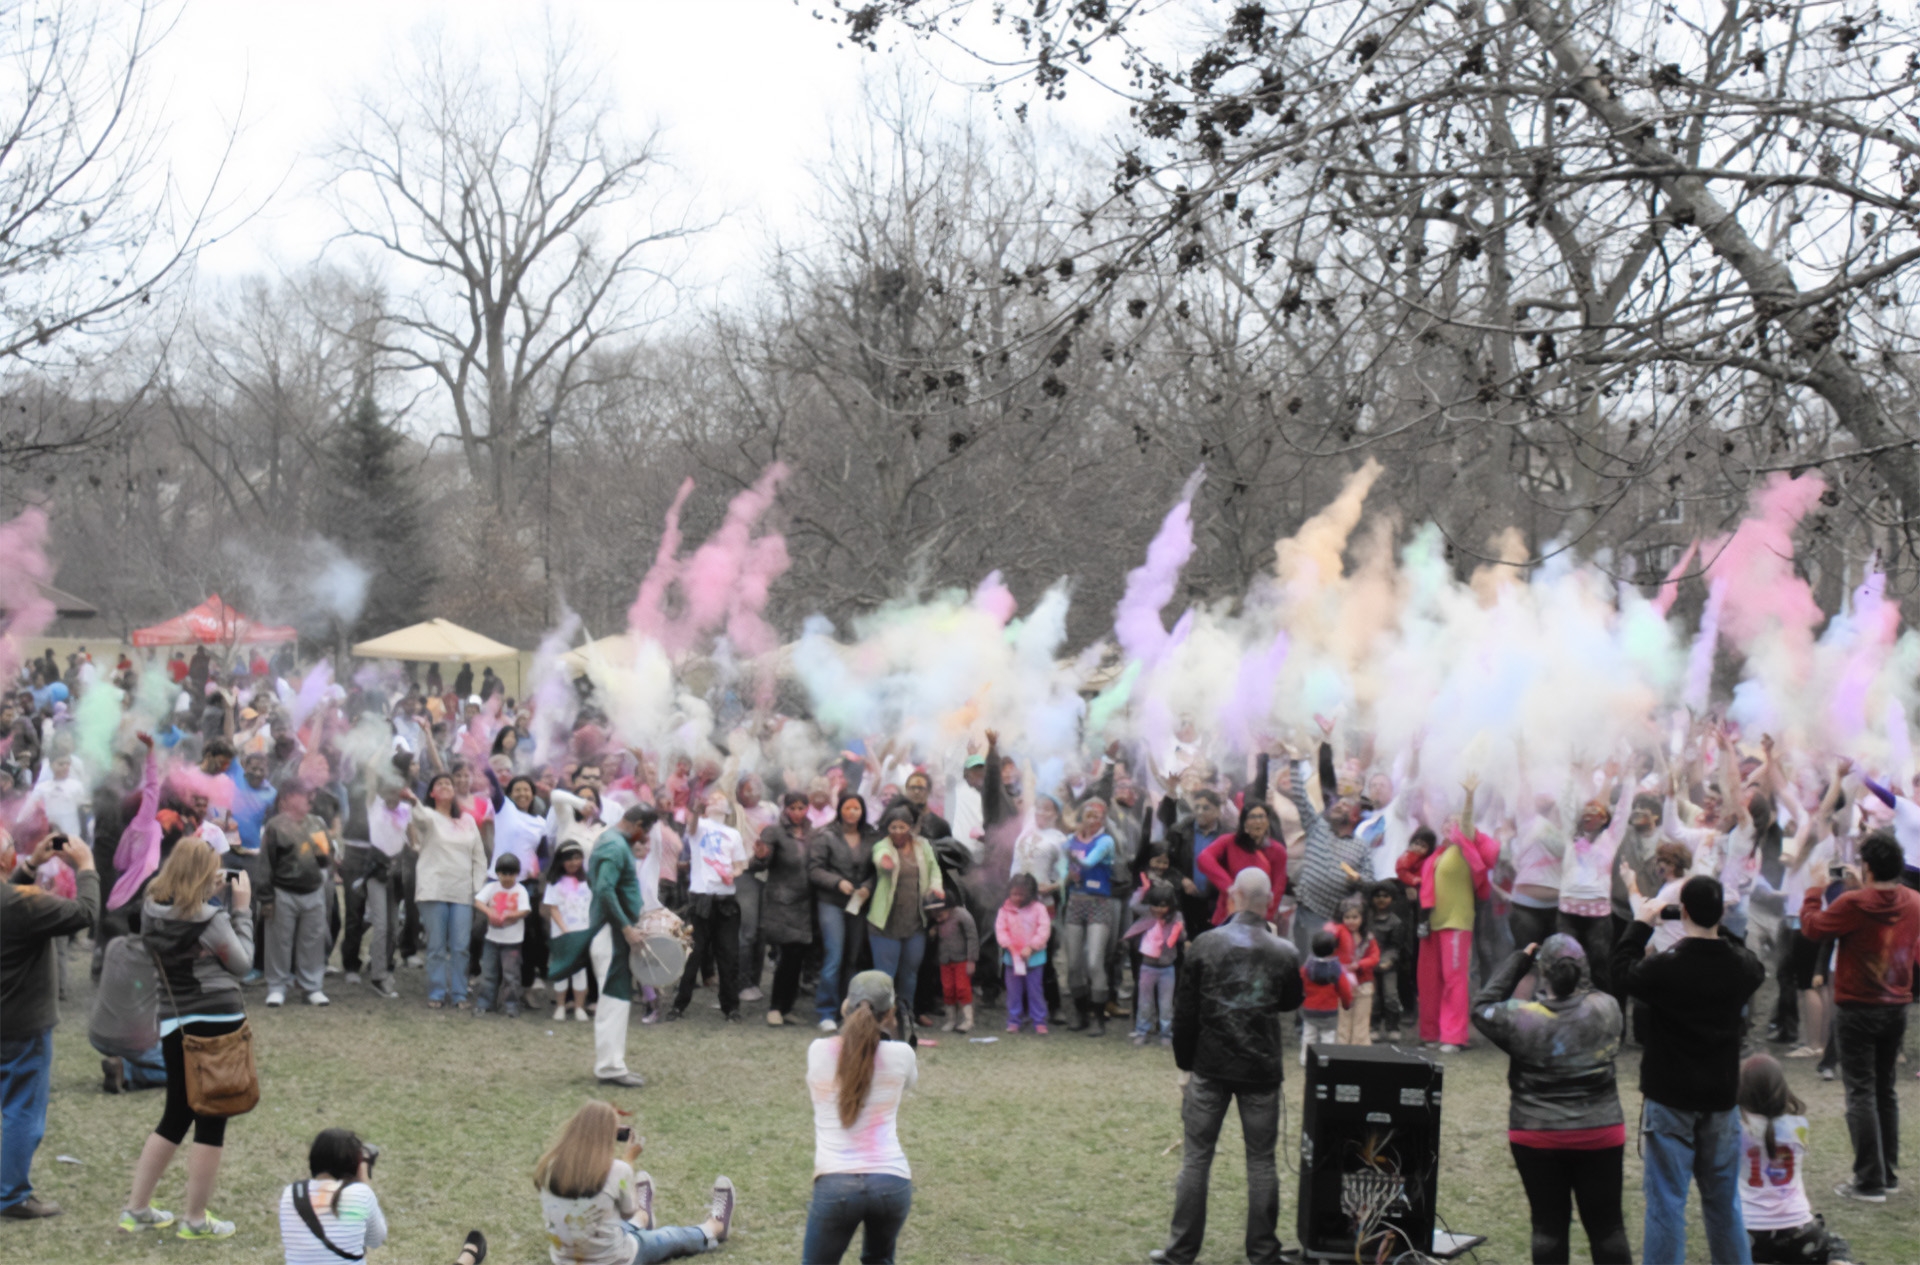 Festivals, like the annual Holi celebration hosted by Simply Vedic in Naperville, provide opportunities to celebrate and share cultures.